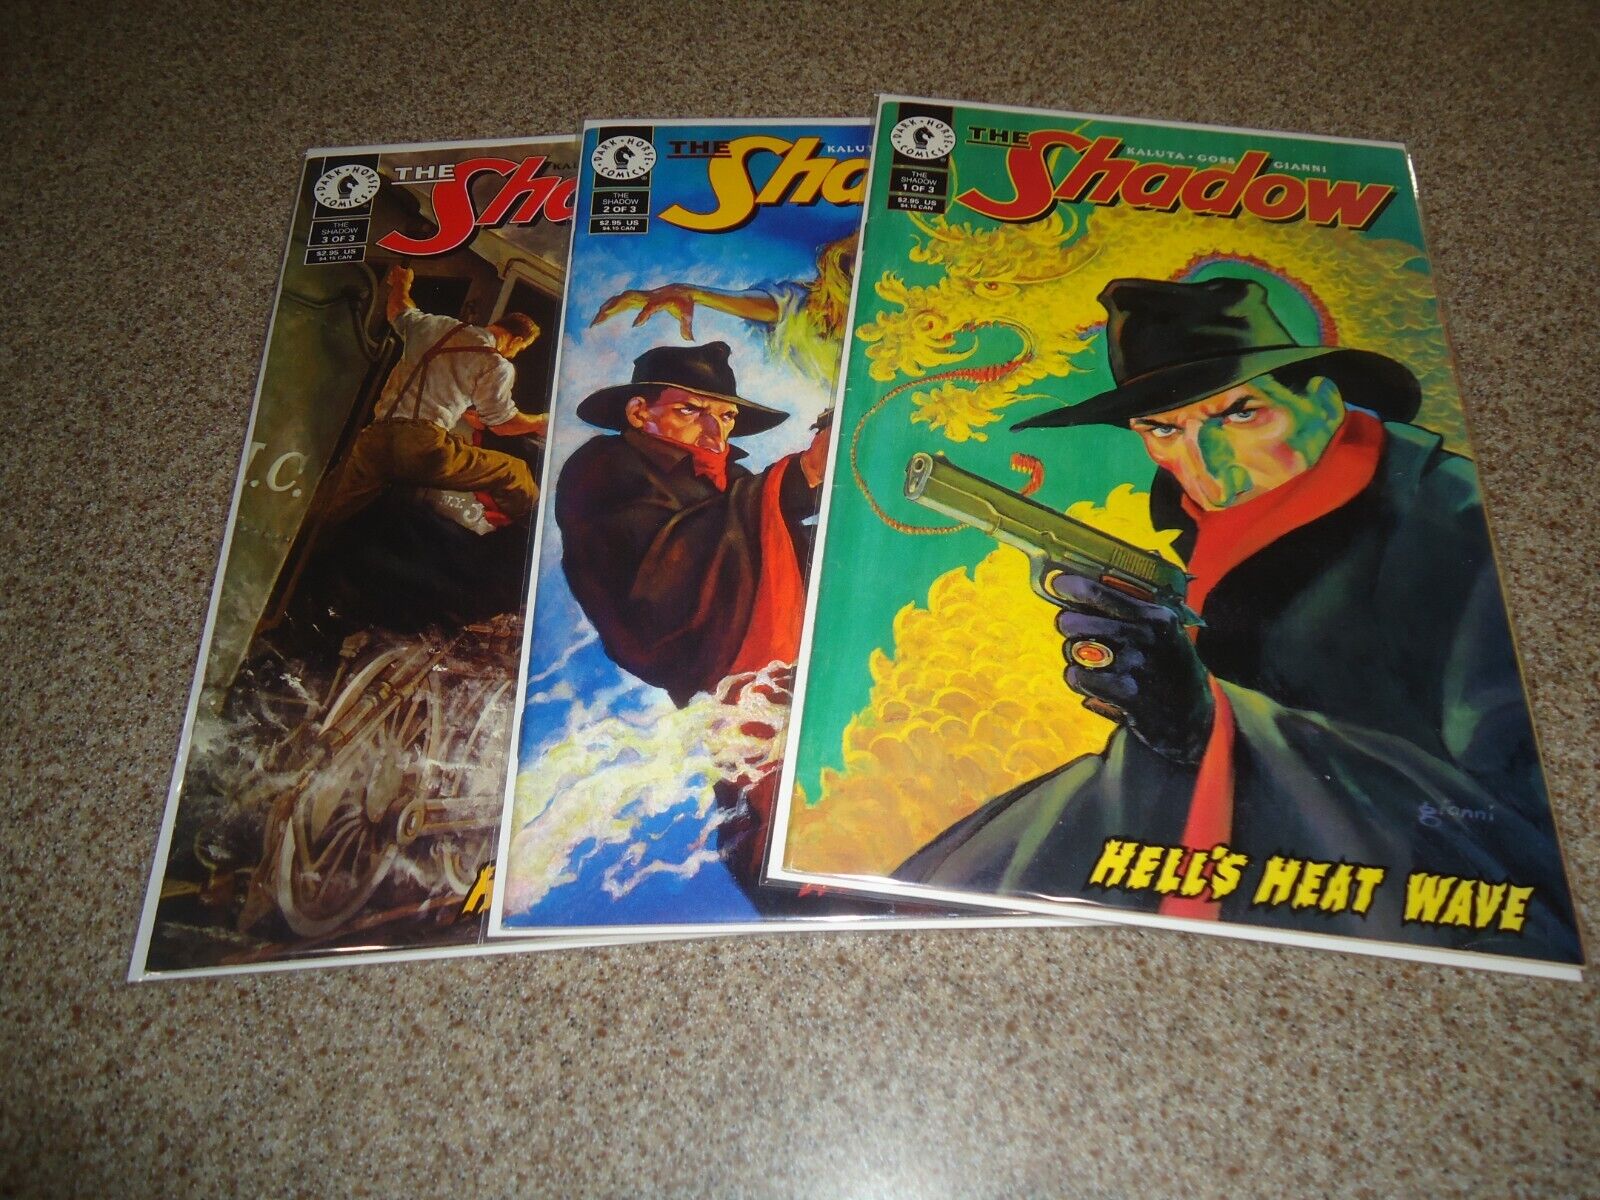 THE SHADOW HELLS HEAT WAVE COMPLETE SERIES 1-3